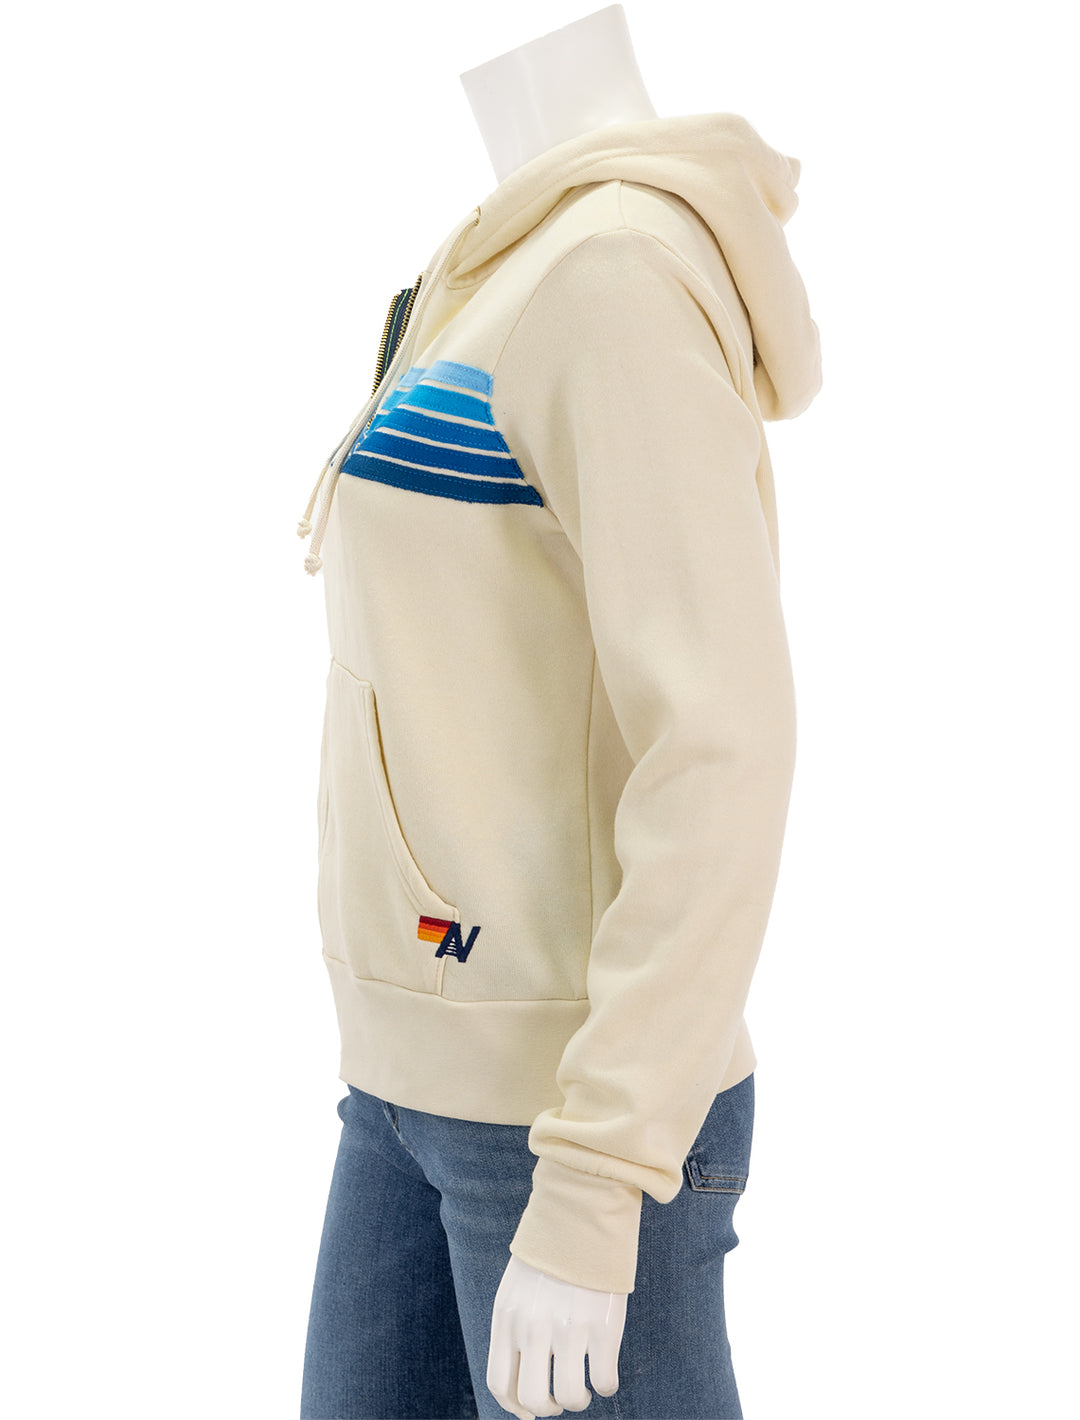 Side view of Aviator Nation's 5 stripe zip hoodie in vintage white and blue.